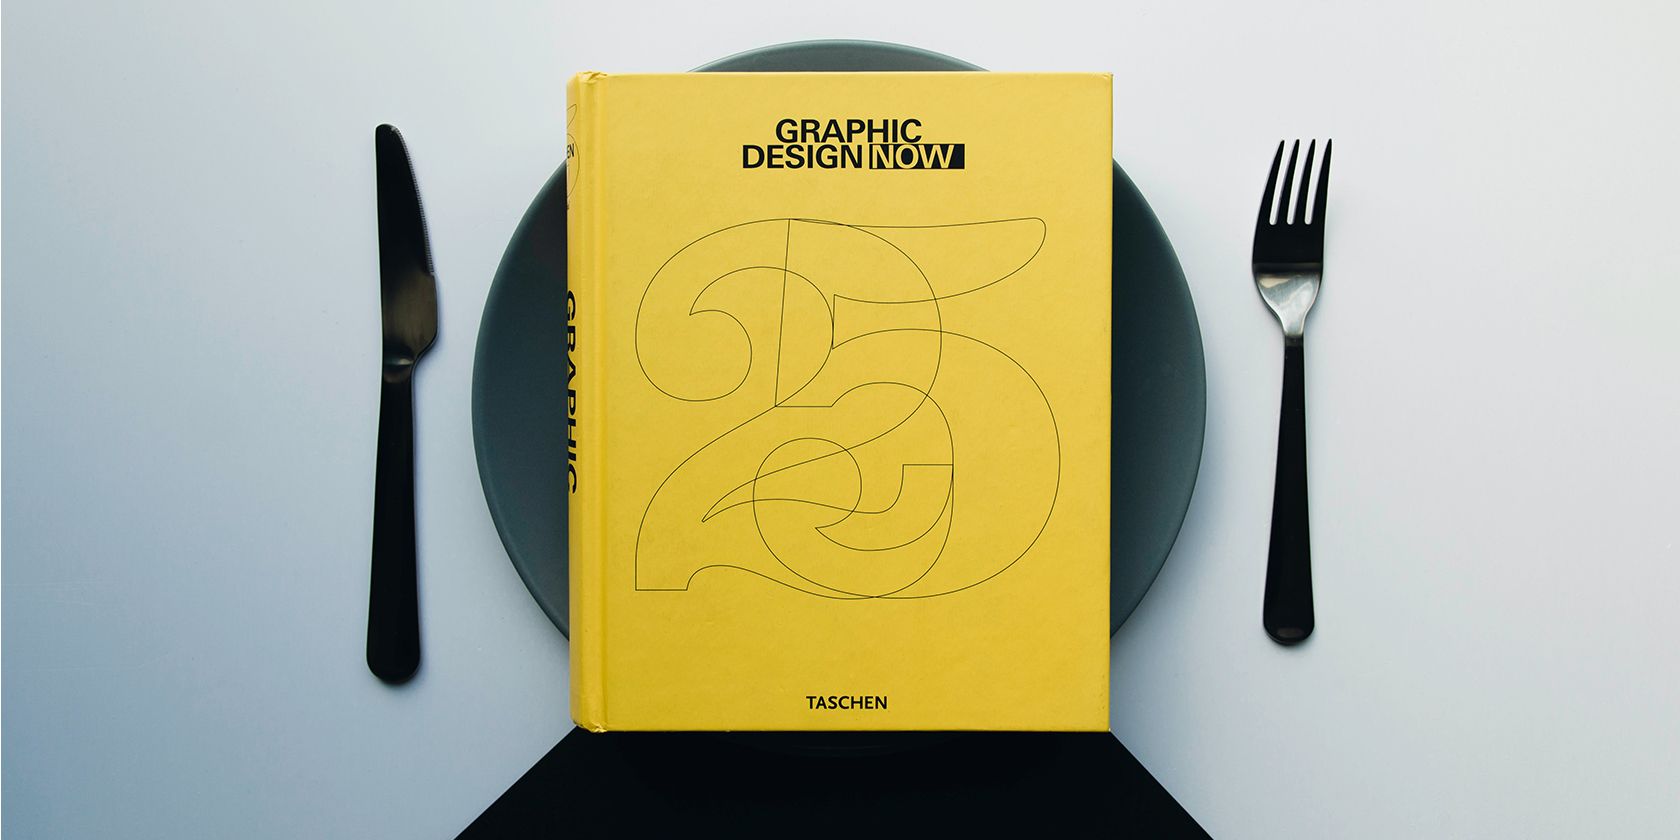 A book on graphic design on a black plate.